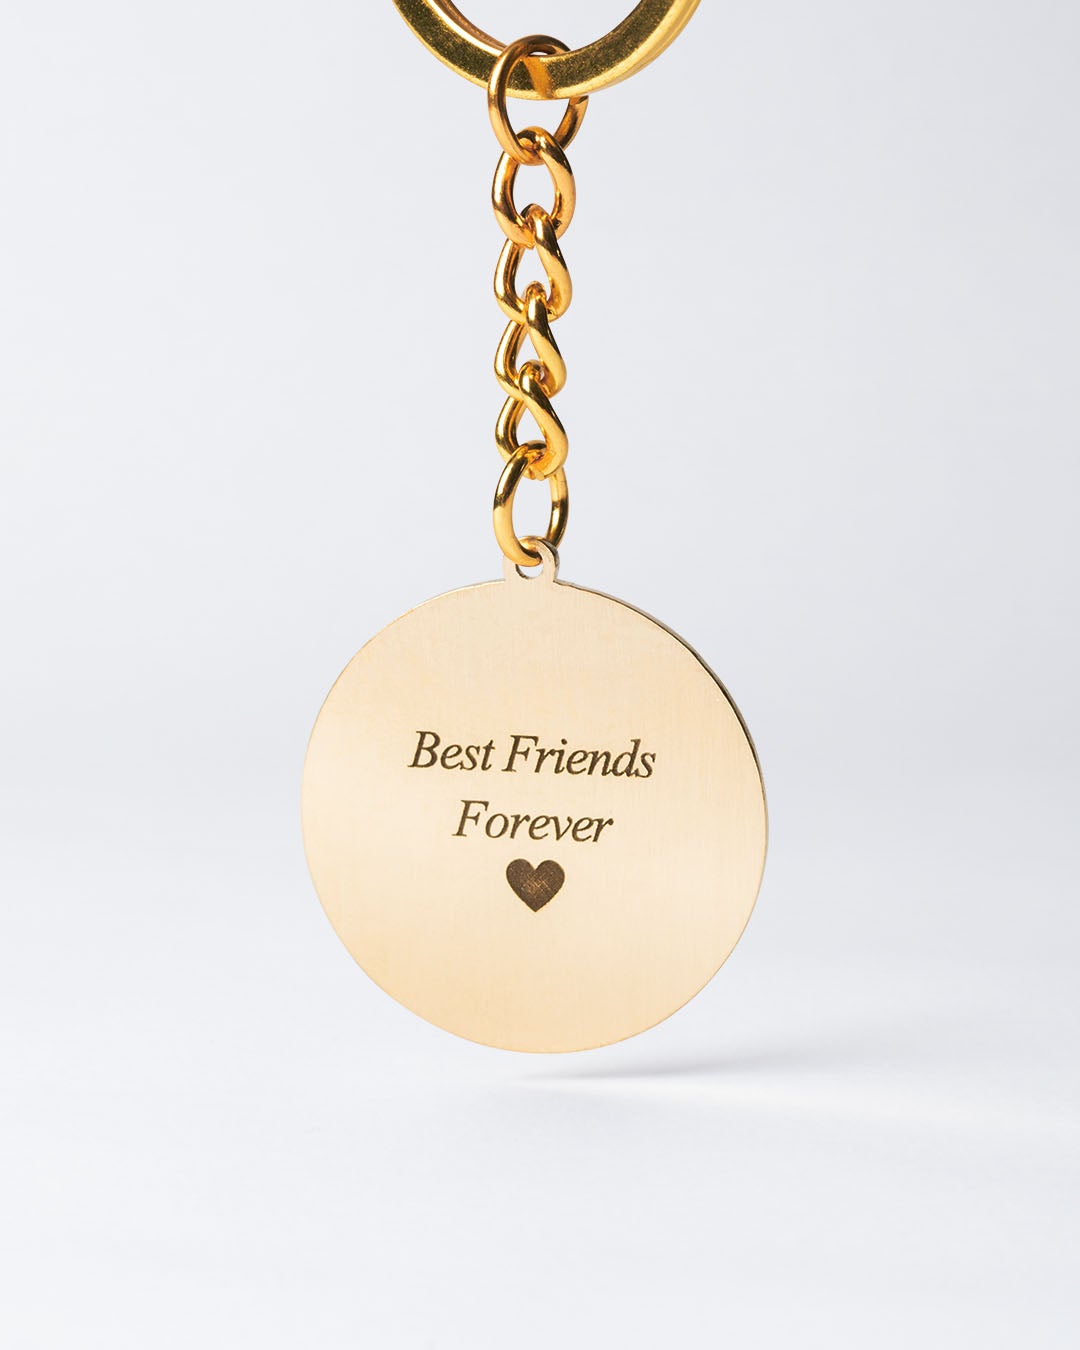 Dog memorial gifts, gold medallion dog keychain engraving